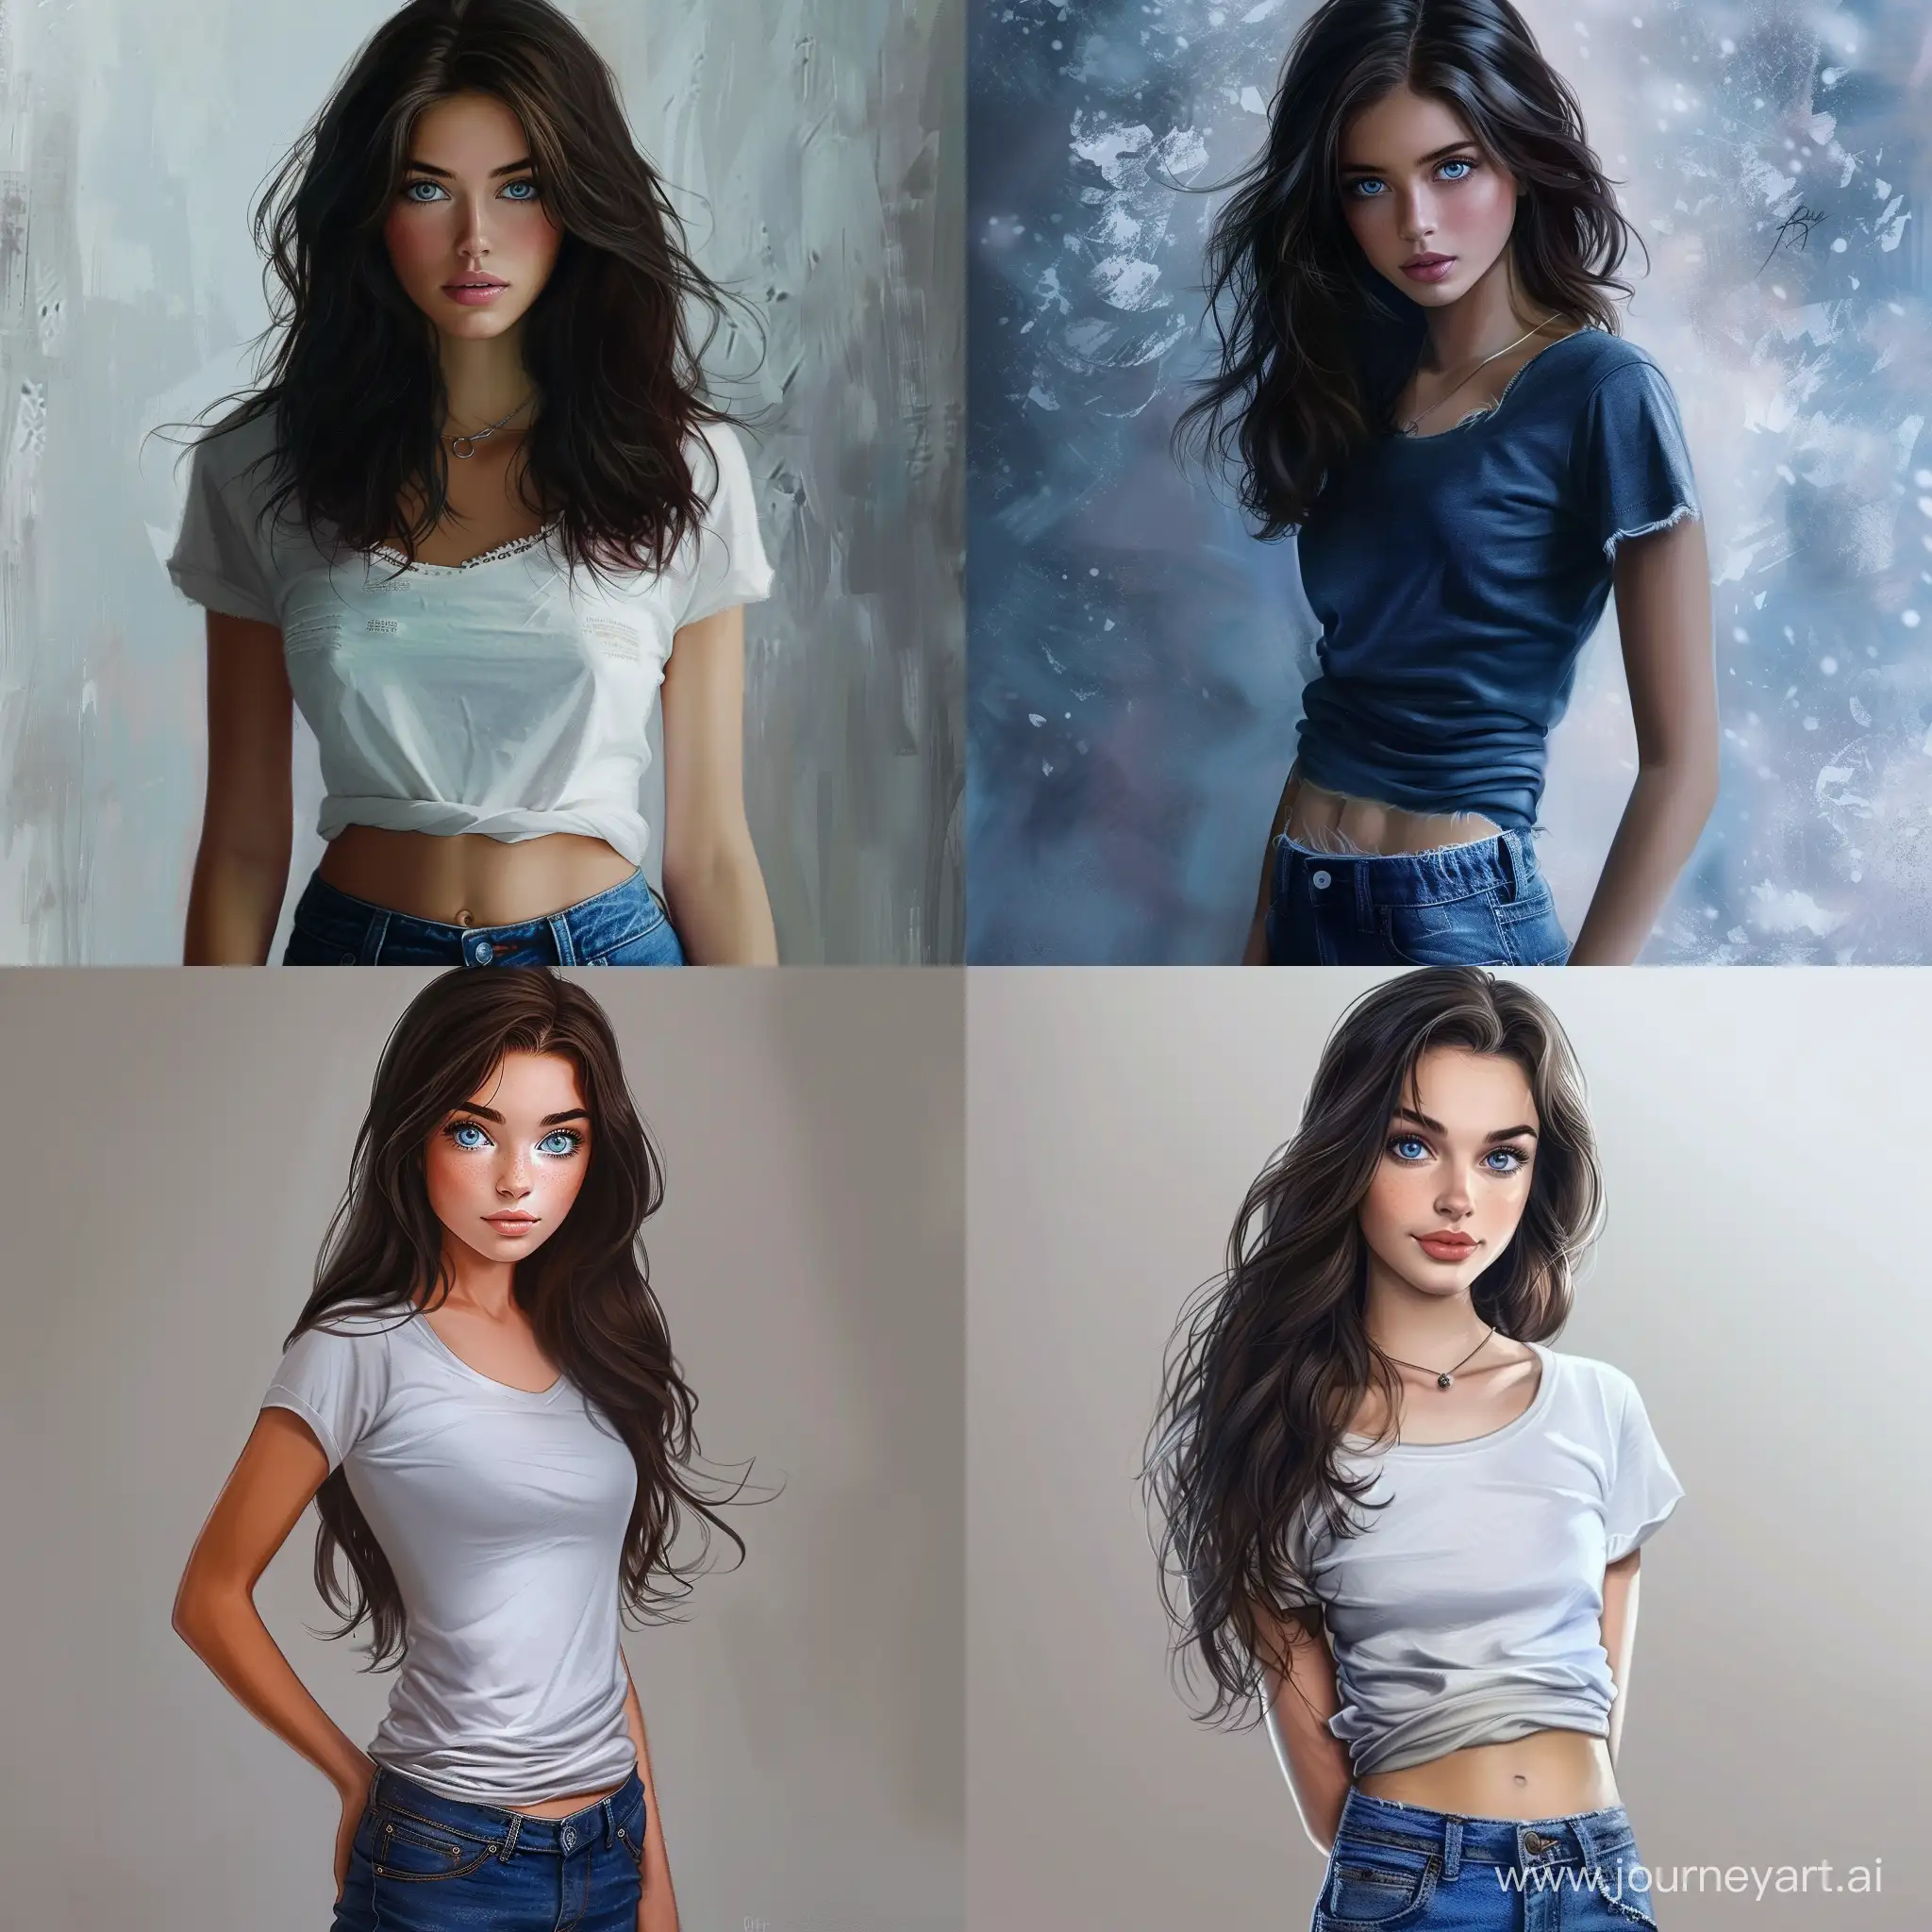 Realistic-Portrait-of-a-Teenage-Girl-with-Dark-Brown-Hair-and-Blue-Eyes-in-Casual-Attire